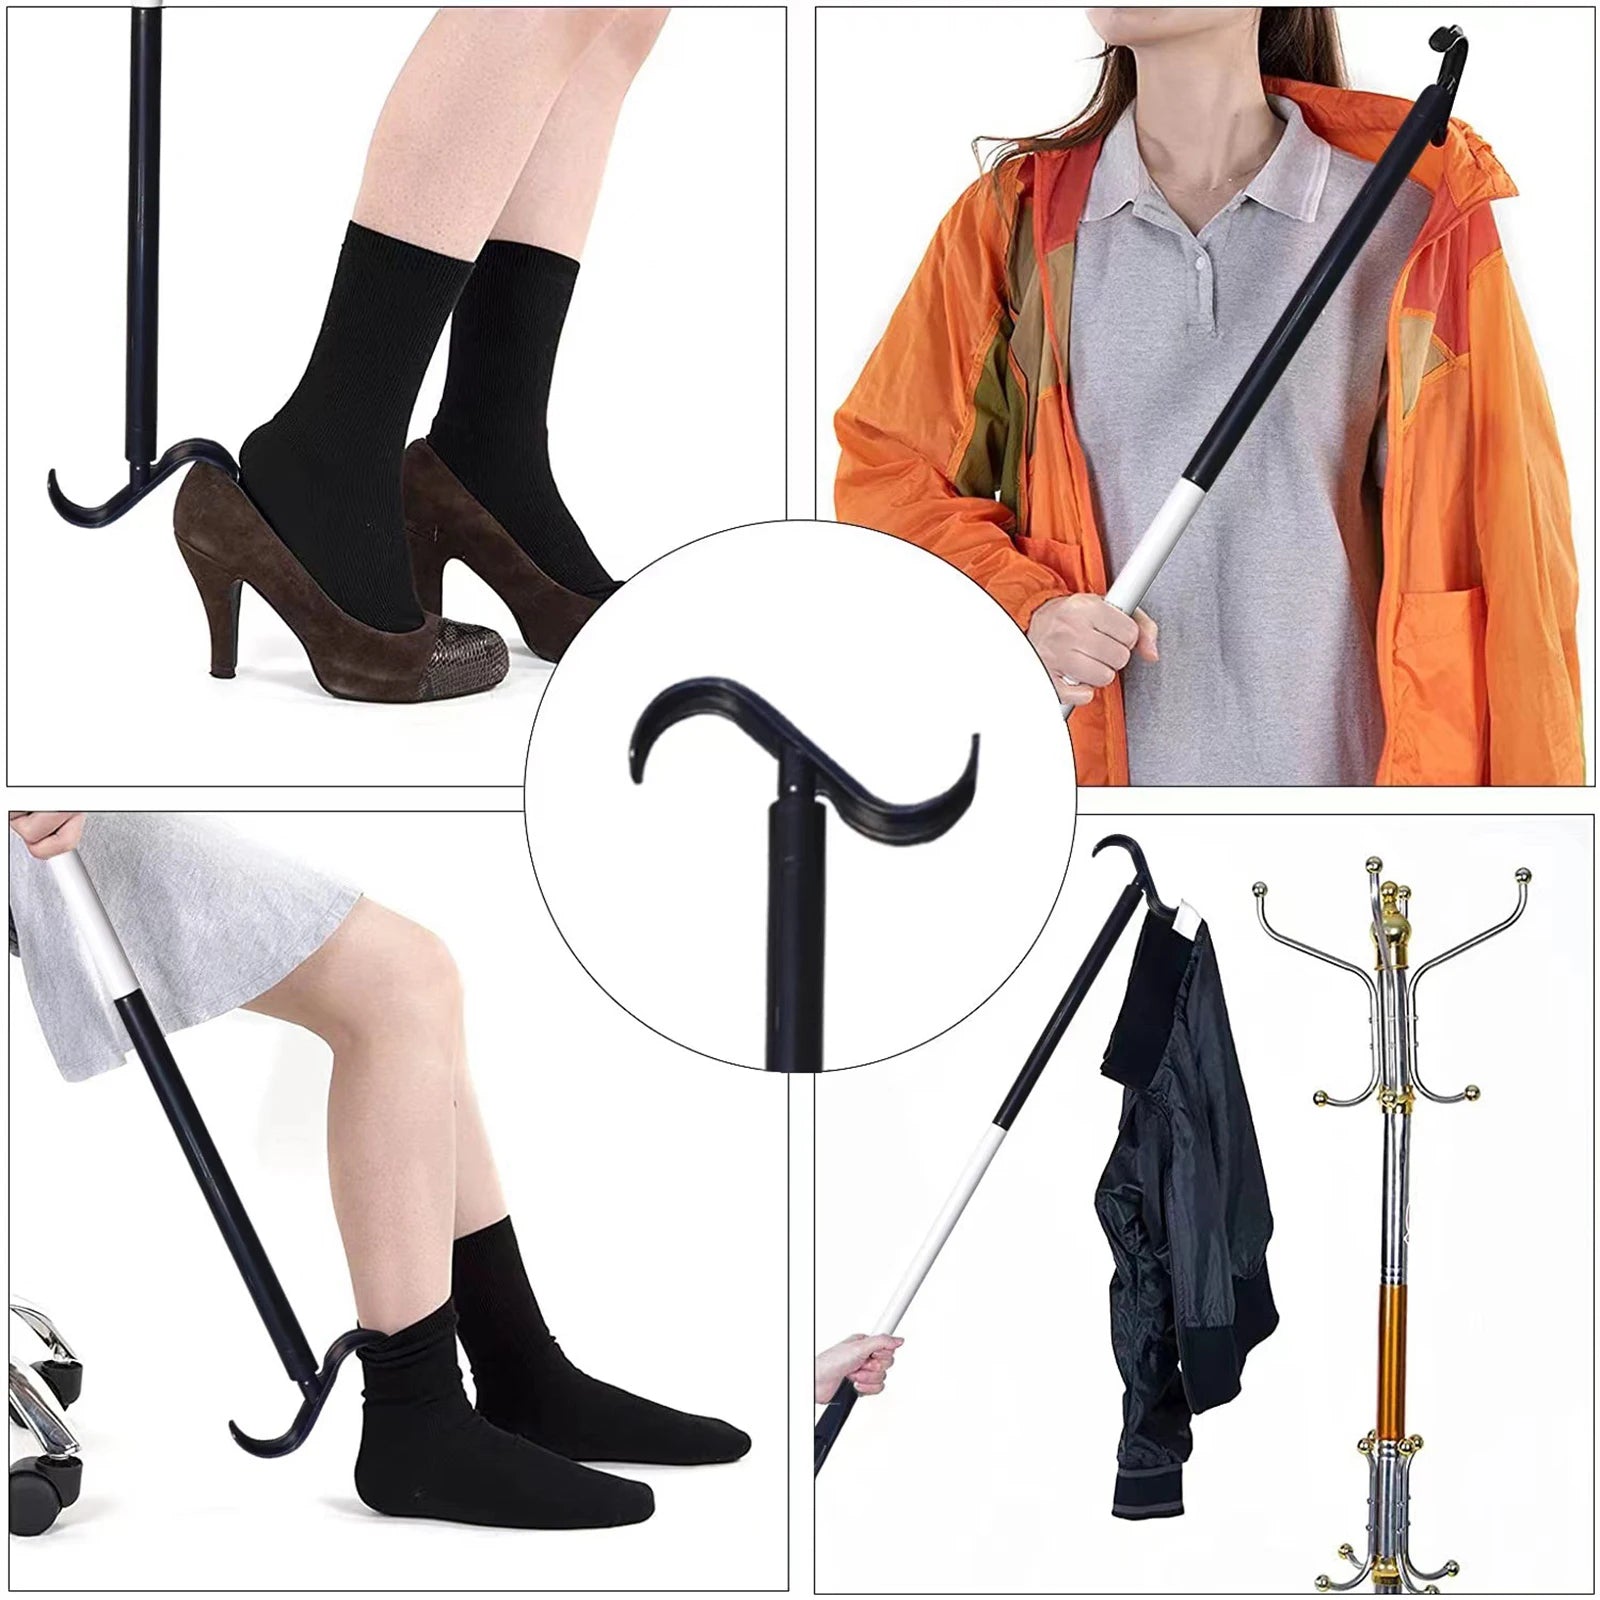 Multifunctional Clothing and Shoe Dressing Aid - with Shoe Horn